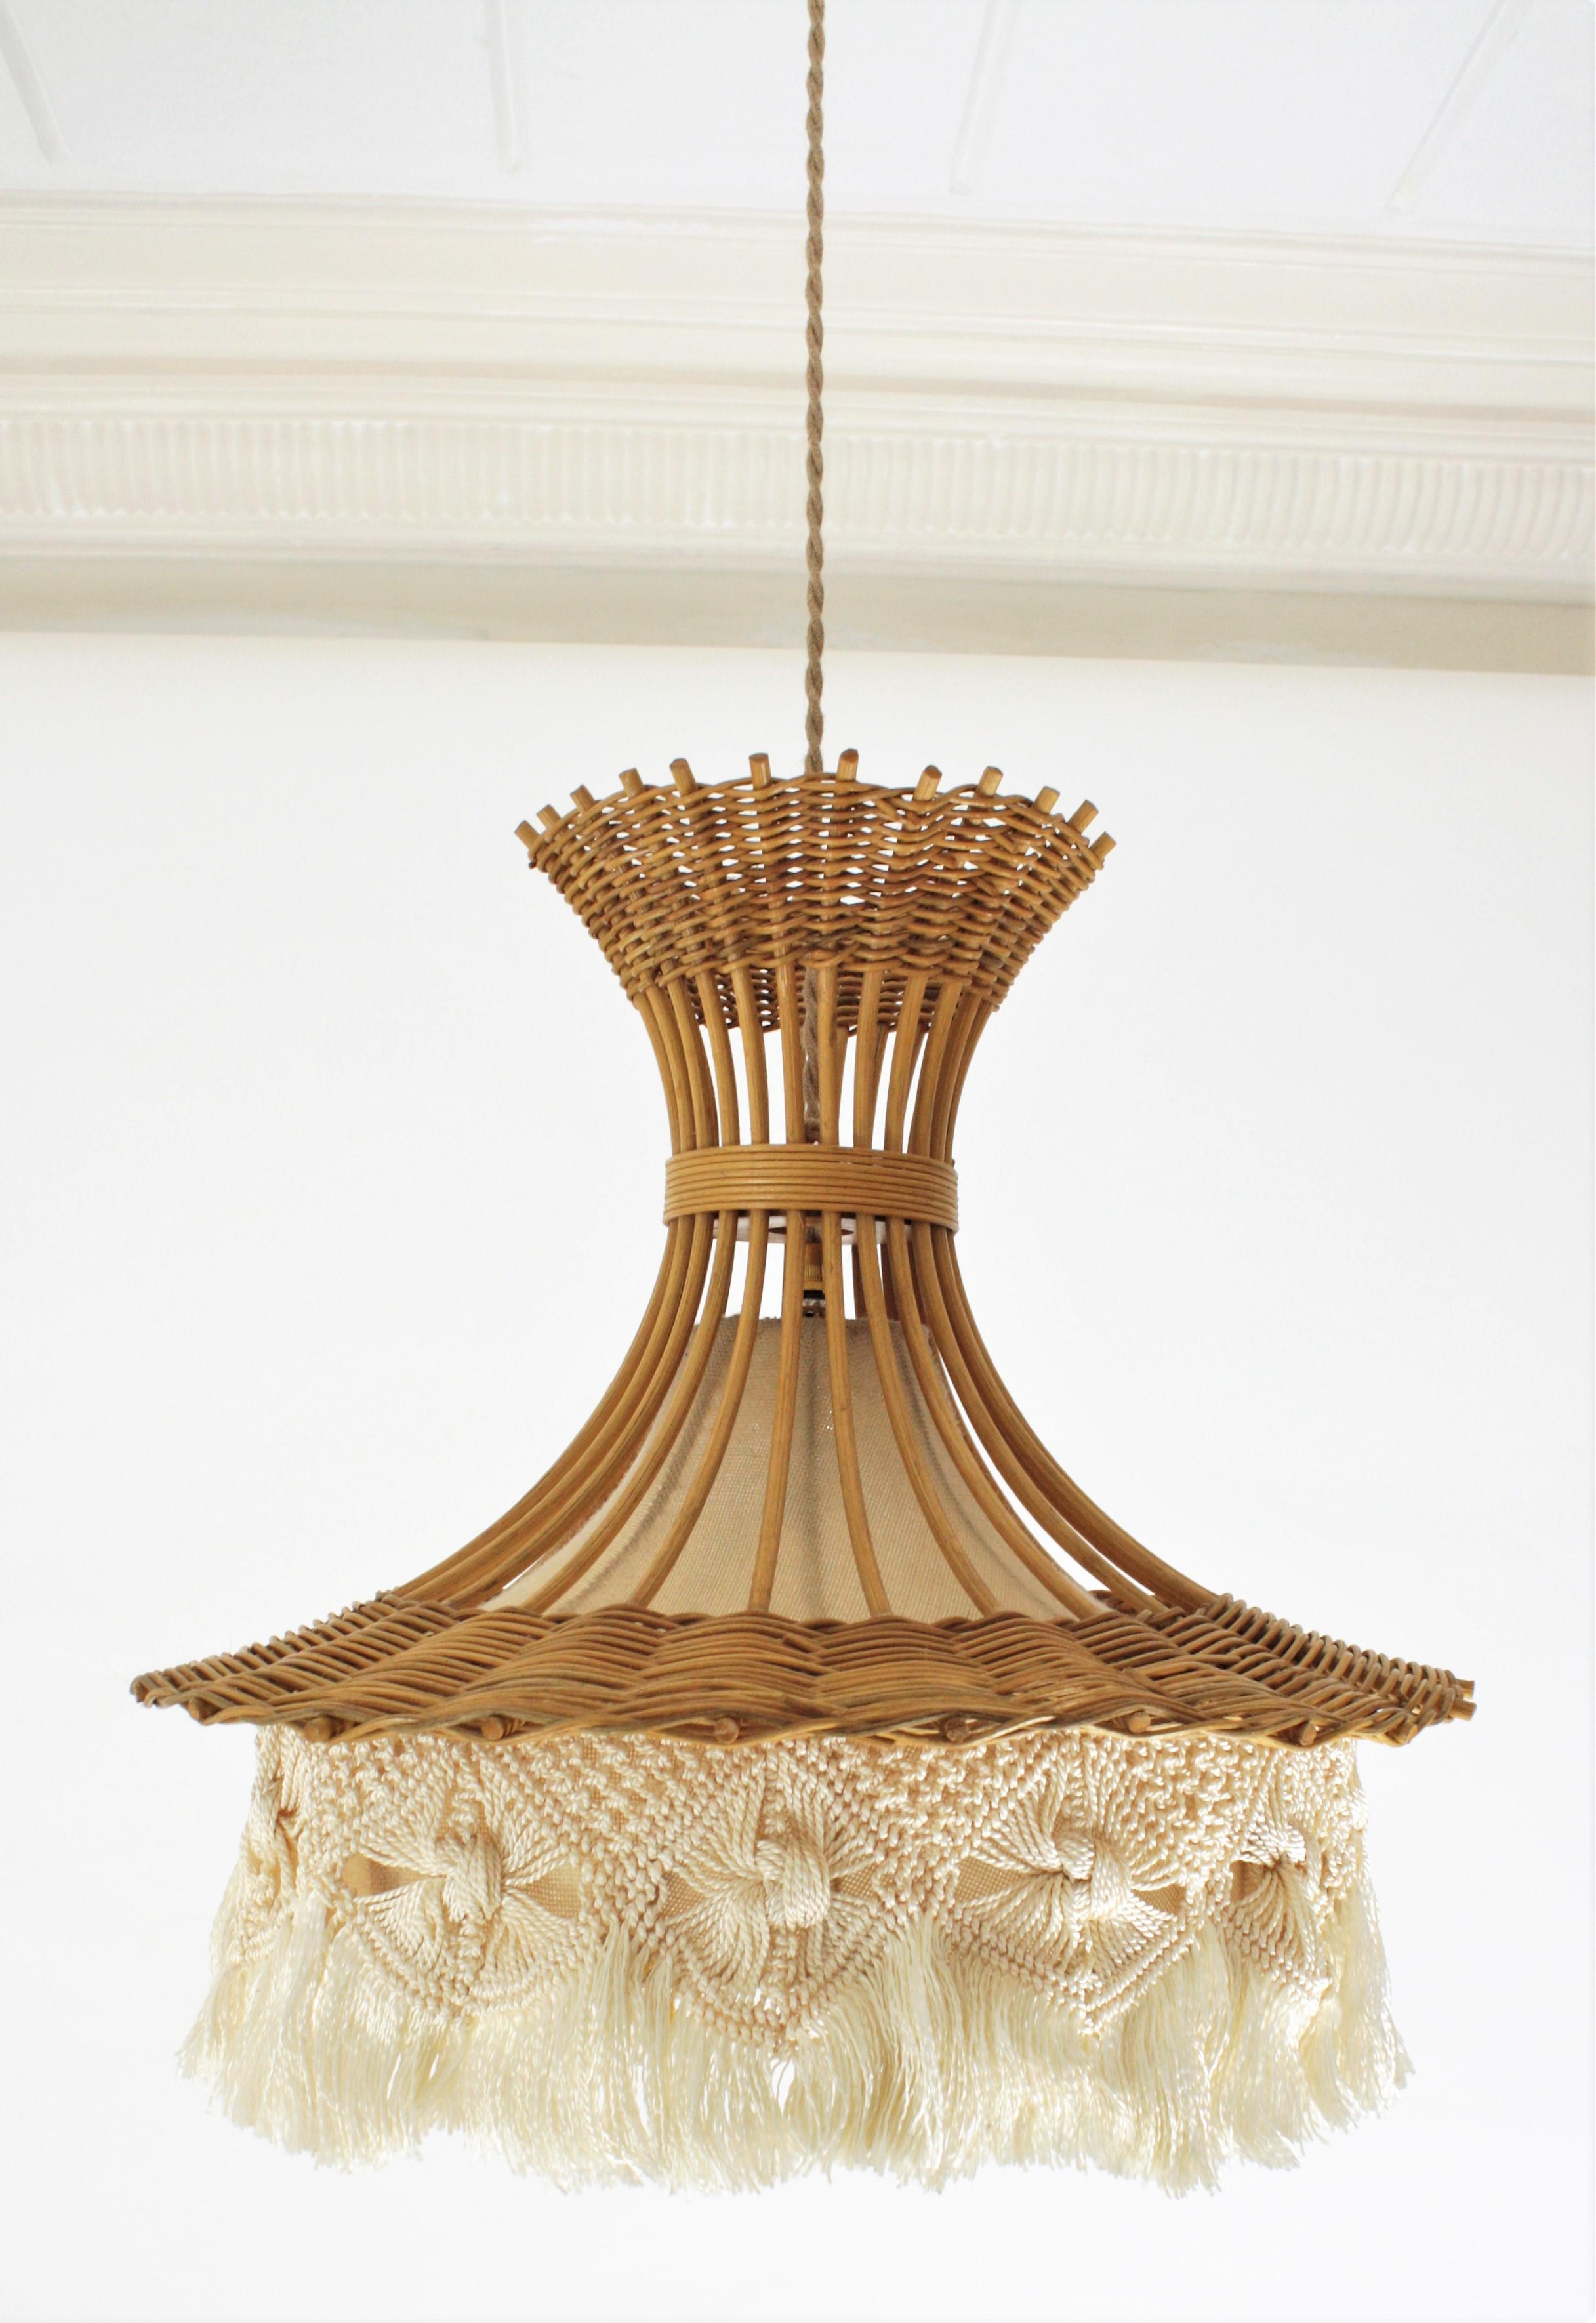 20th Century French Rattan and Macrame Large Pendant Lamp / Hanging Light with Fringe